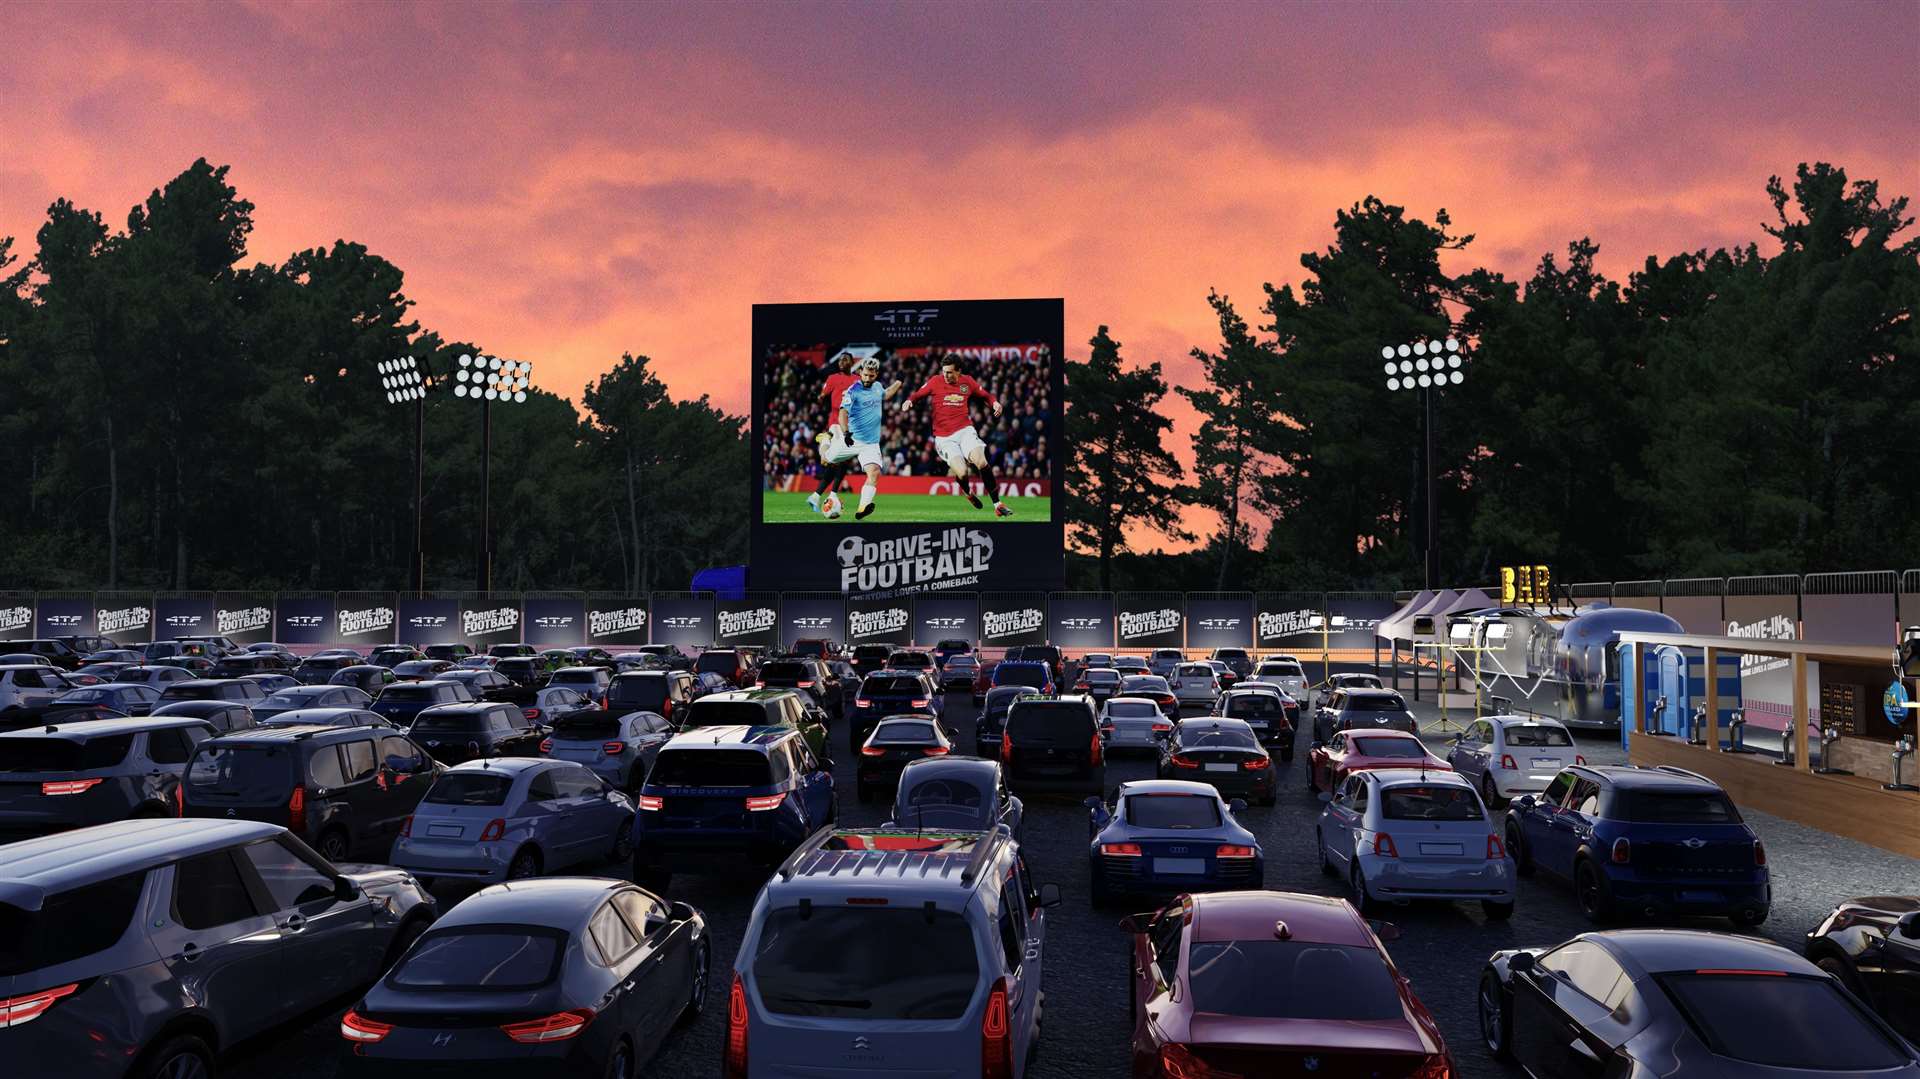 Drive-in football is coming to Swanley Park